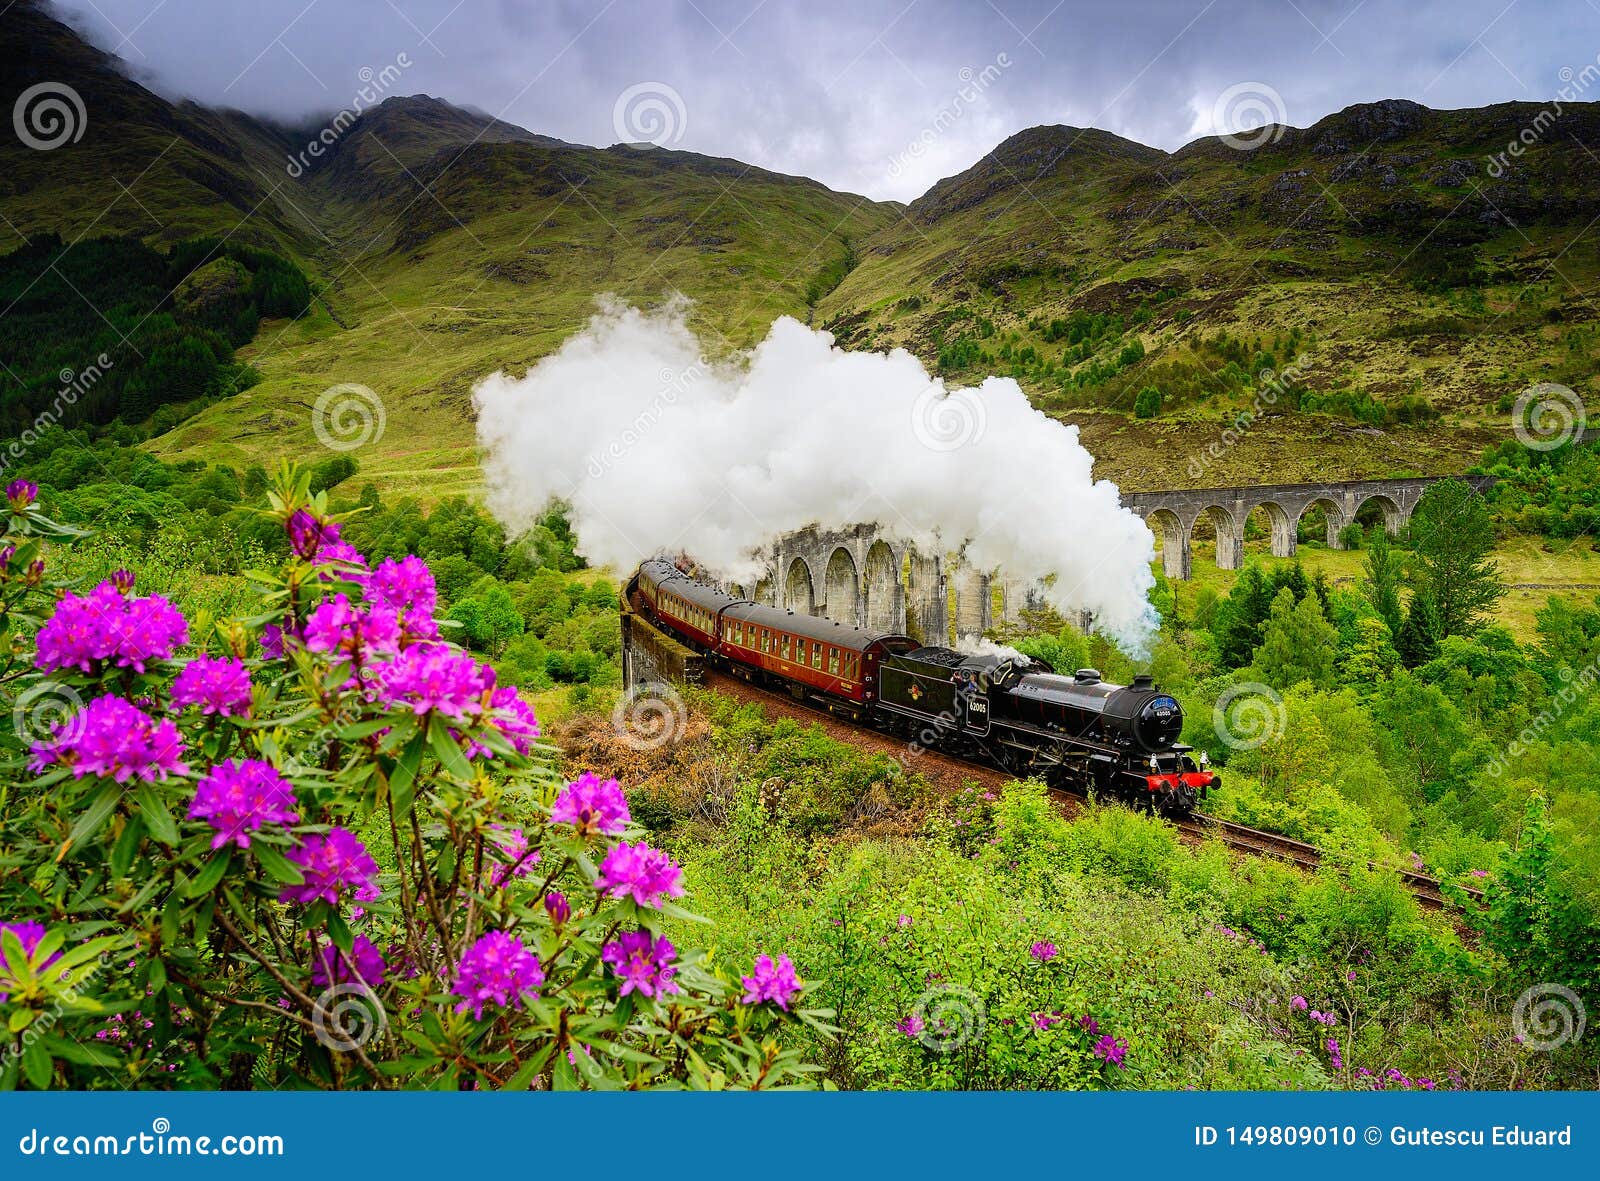 glenfinnan railway viaduct in scotland with a steam train in the spring time